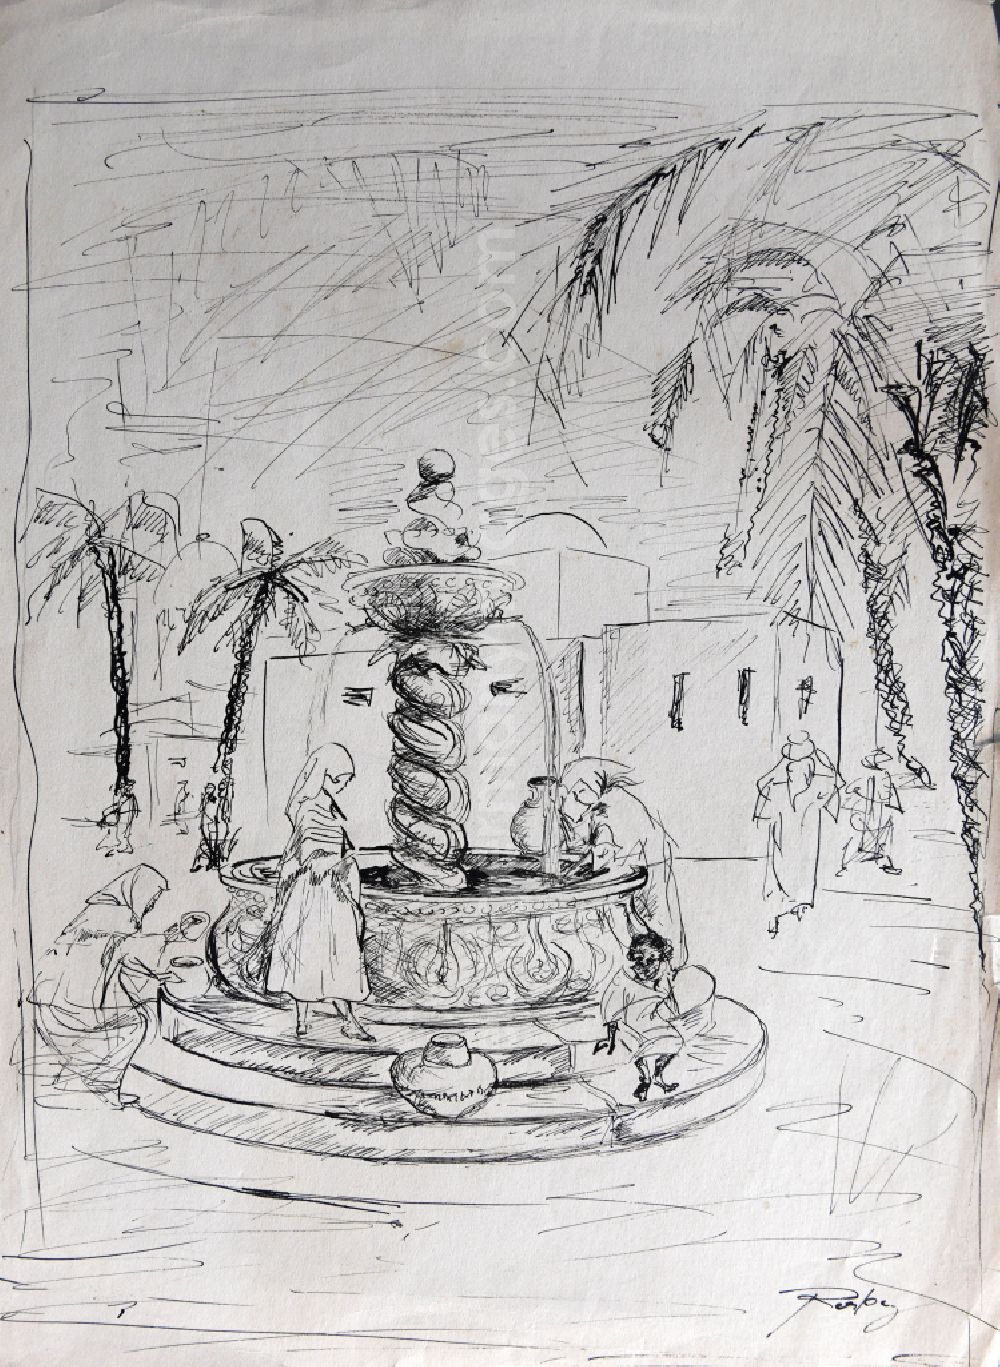 GDR image archive: Samarqand - VG image free work: ink drawing Water fountain at the market by the artist Siegfried Gebser in Samarqand in Usbekistan